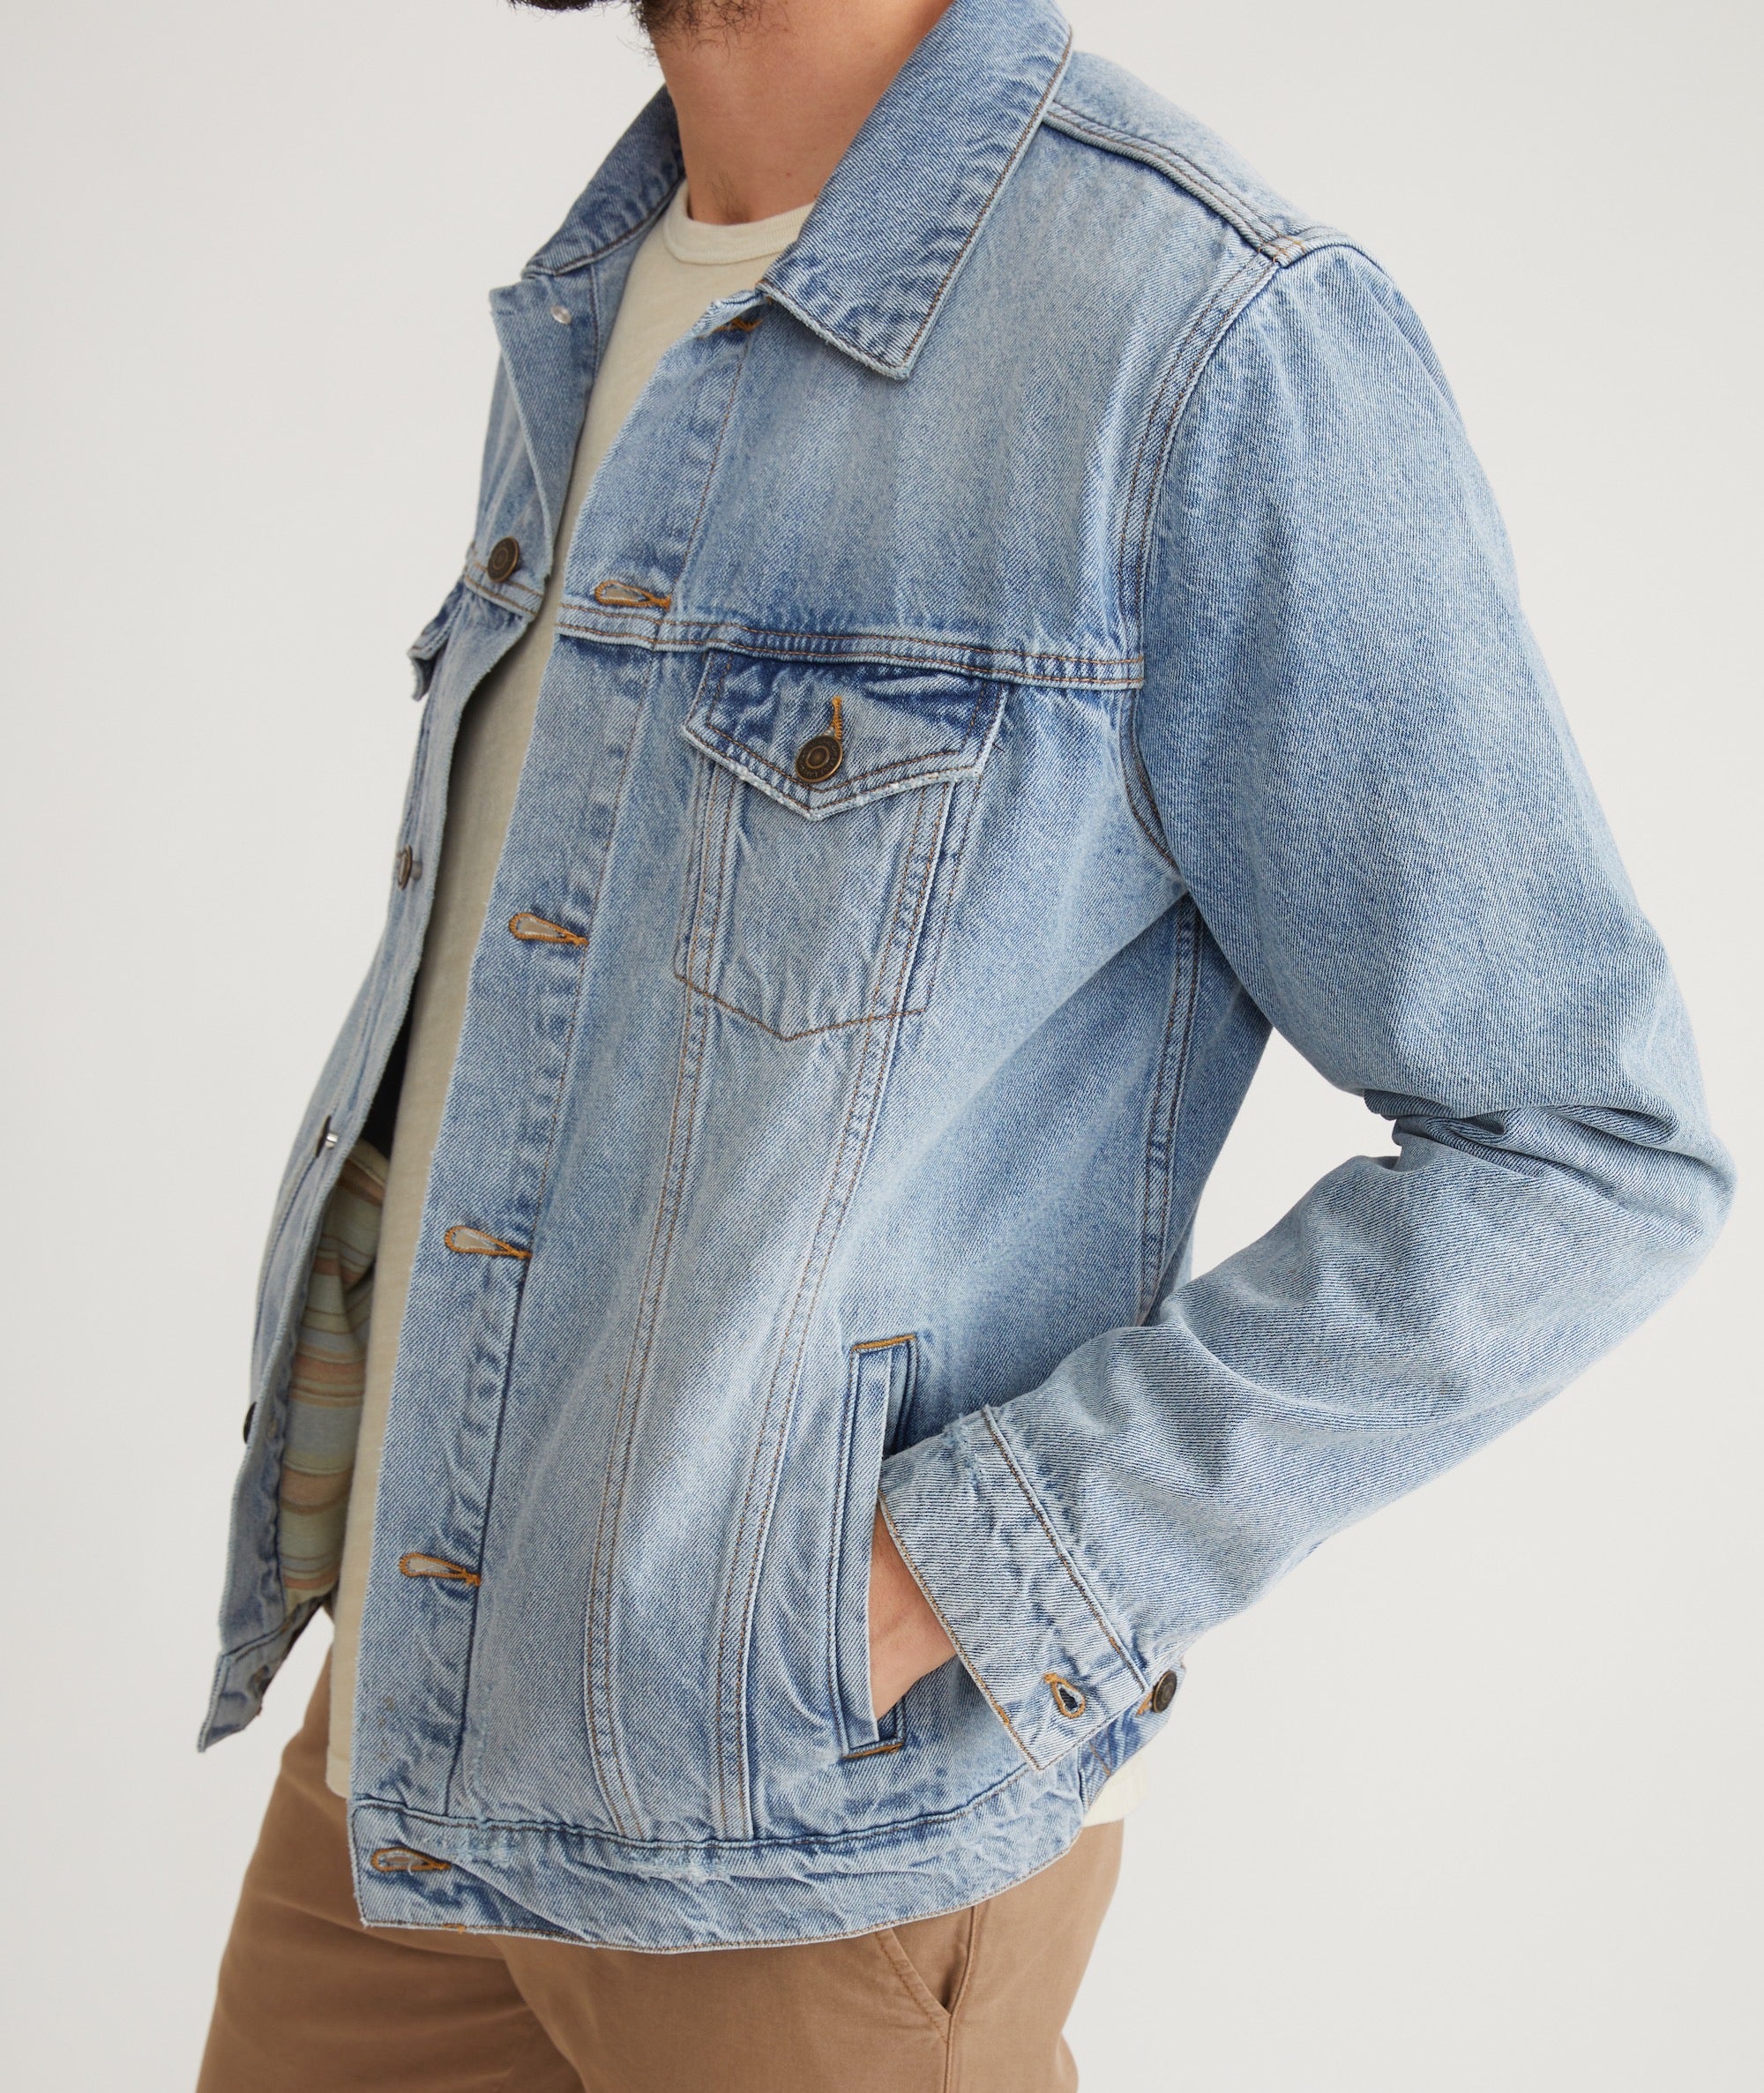 How to Layer a Denim Jacket